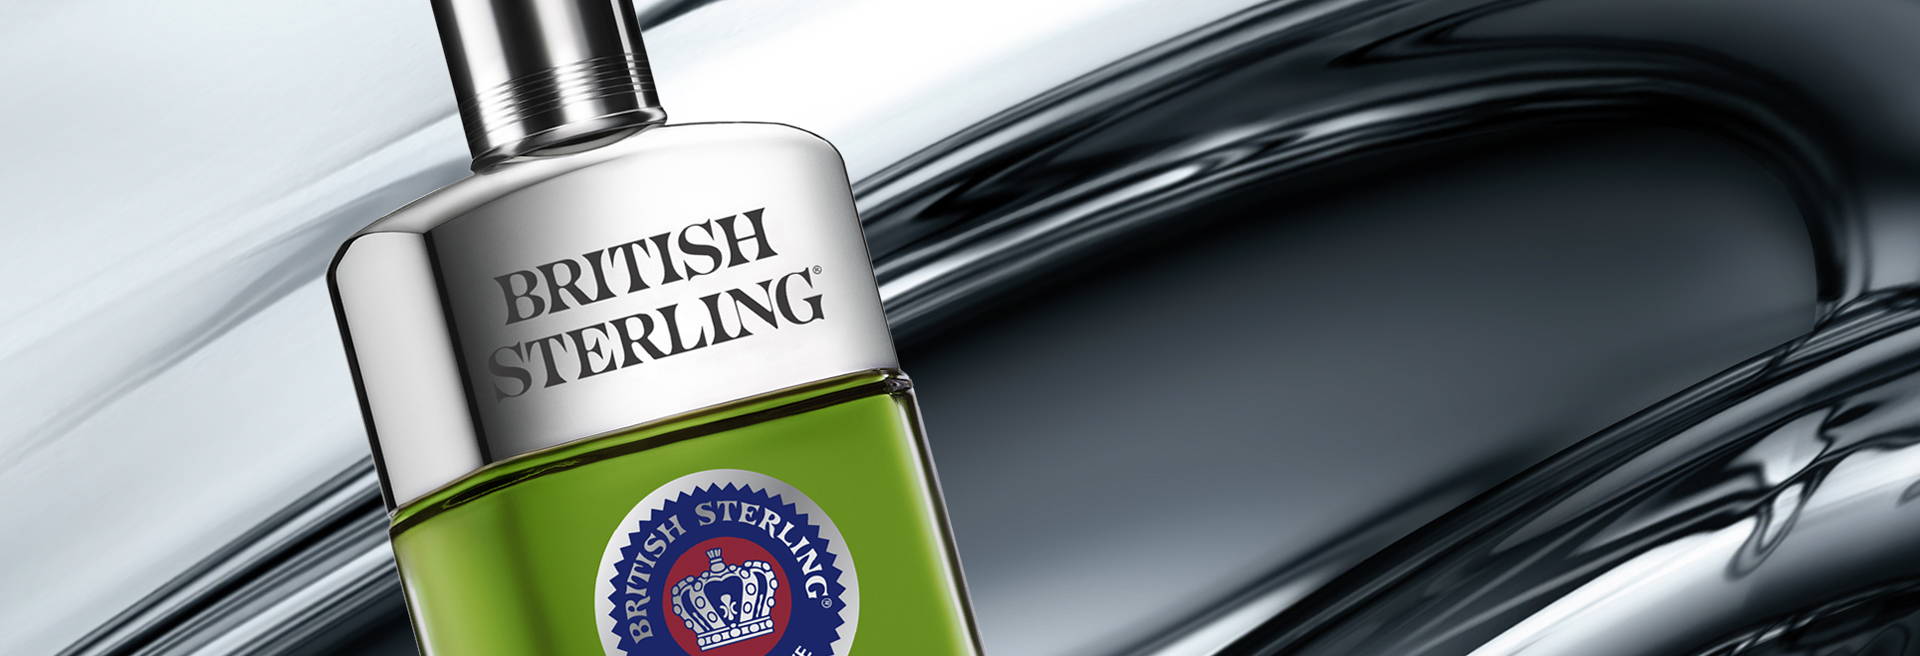 Editorial shot: Bottle of British Sterling cologne on silver chrome background